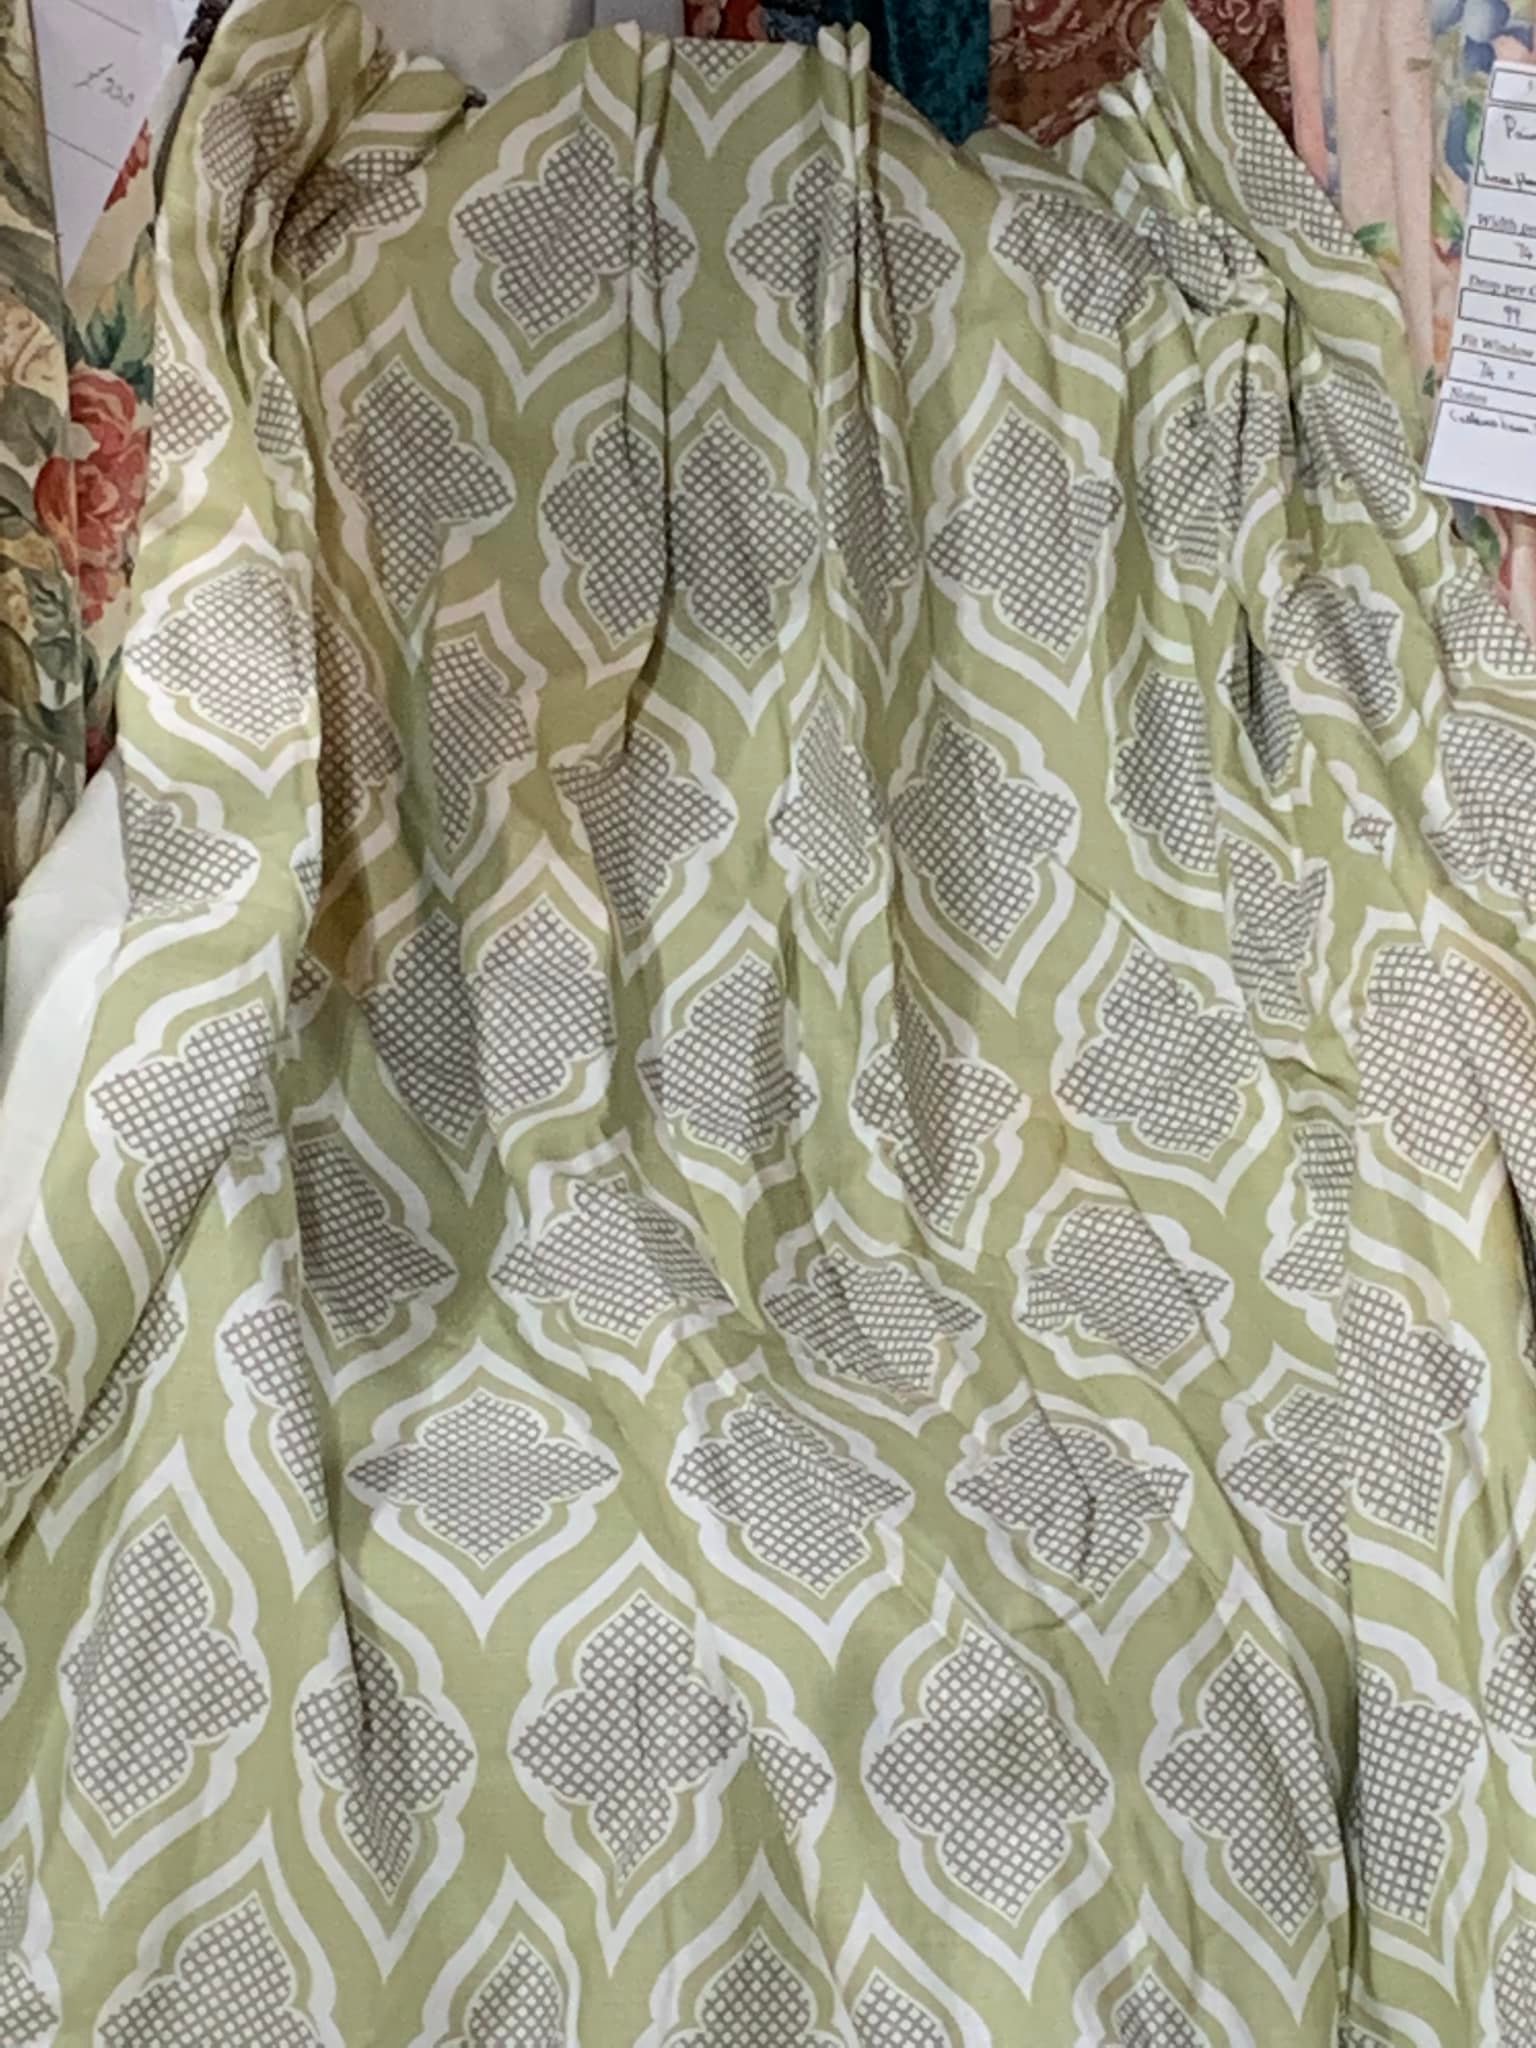 2 Prs Light Green Linen Patterned Pinch Pleat Interlined Curtains